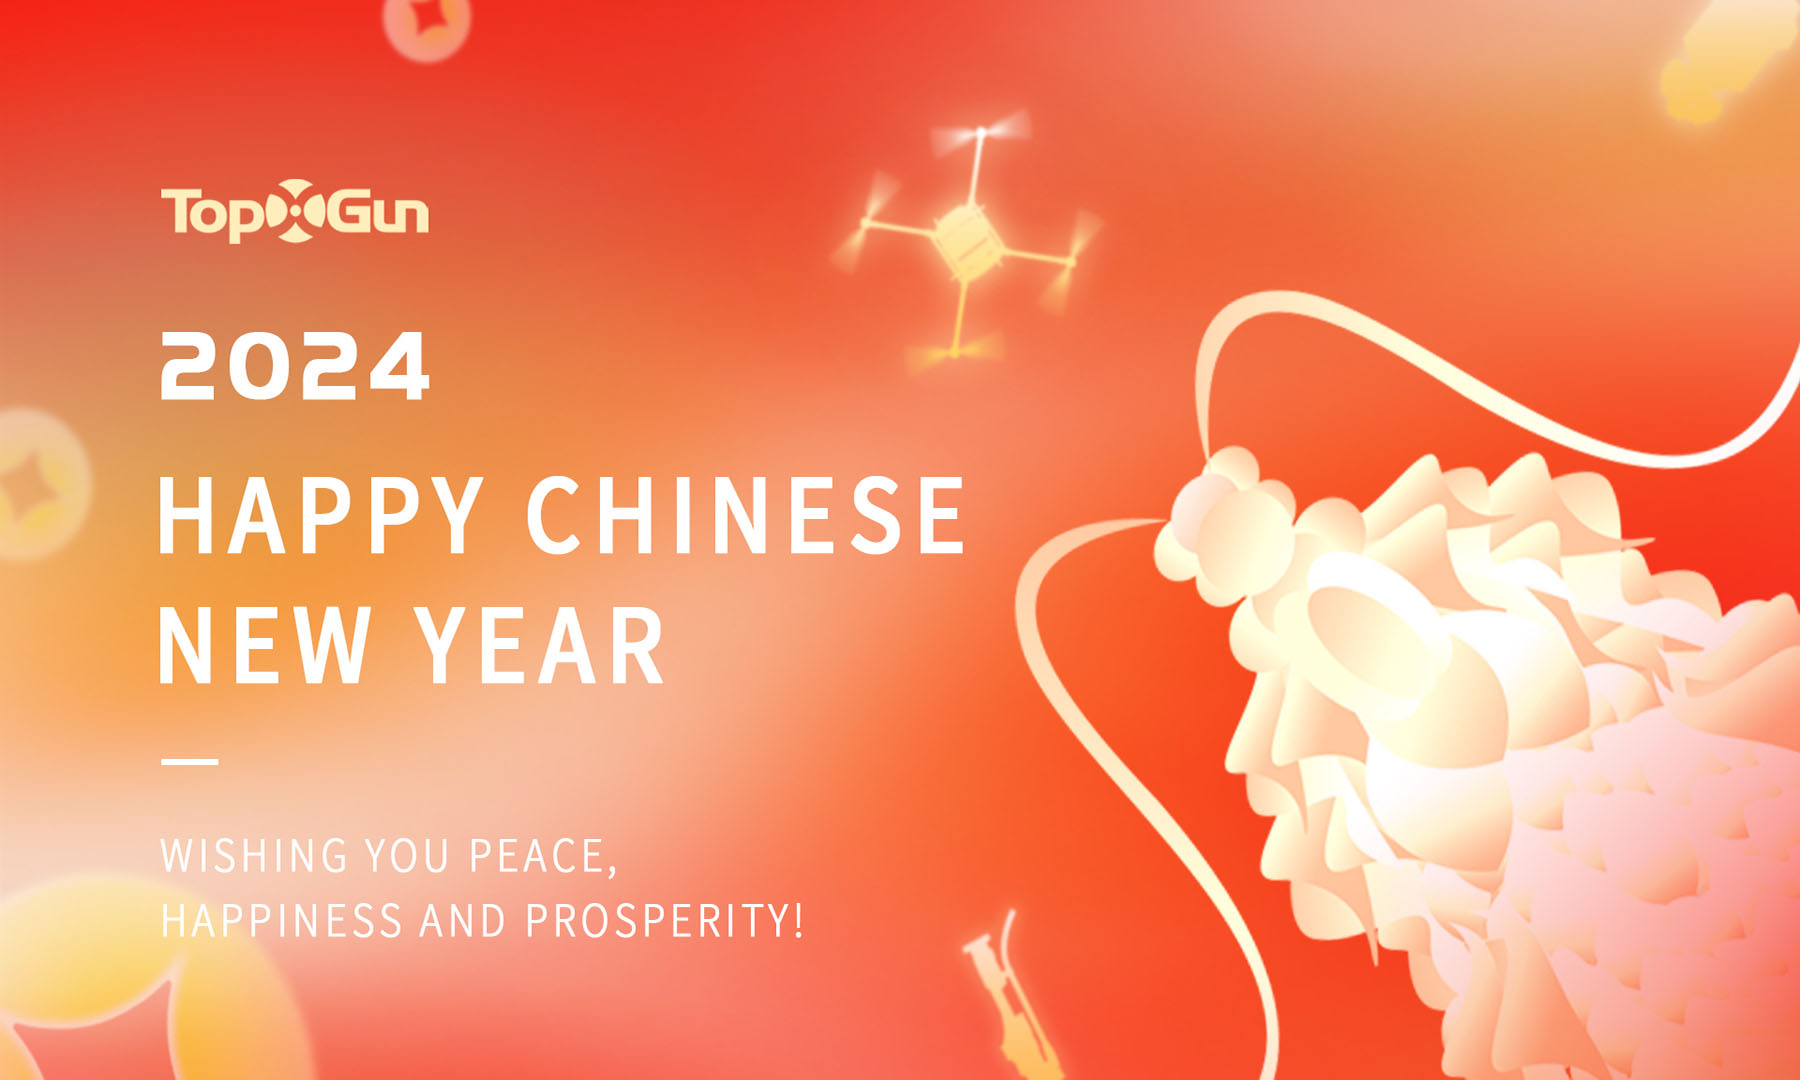 Celebrate the 2024 Chinese New Year with Topxgun